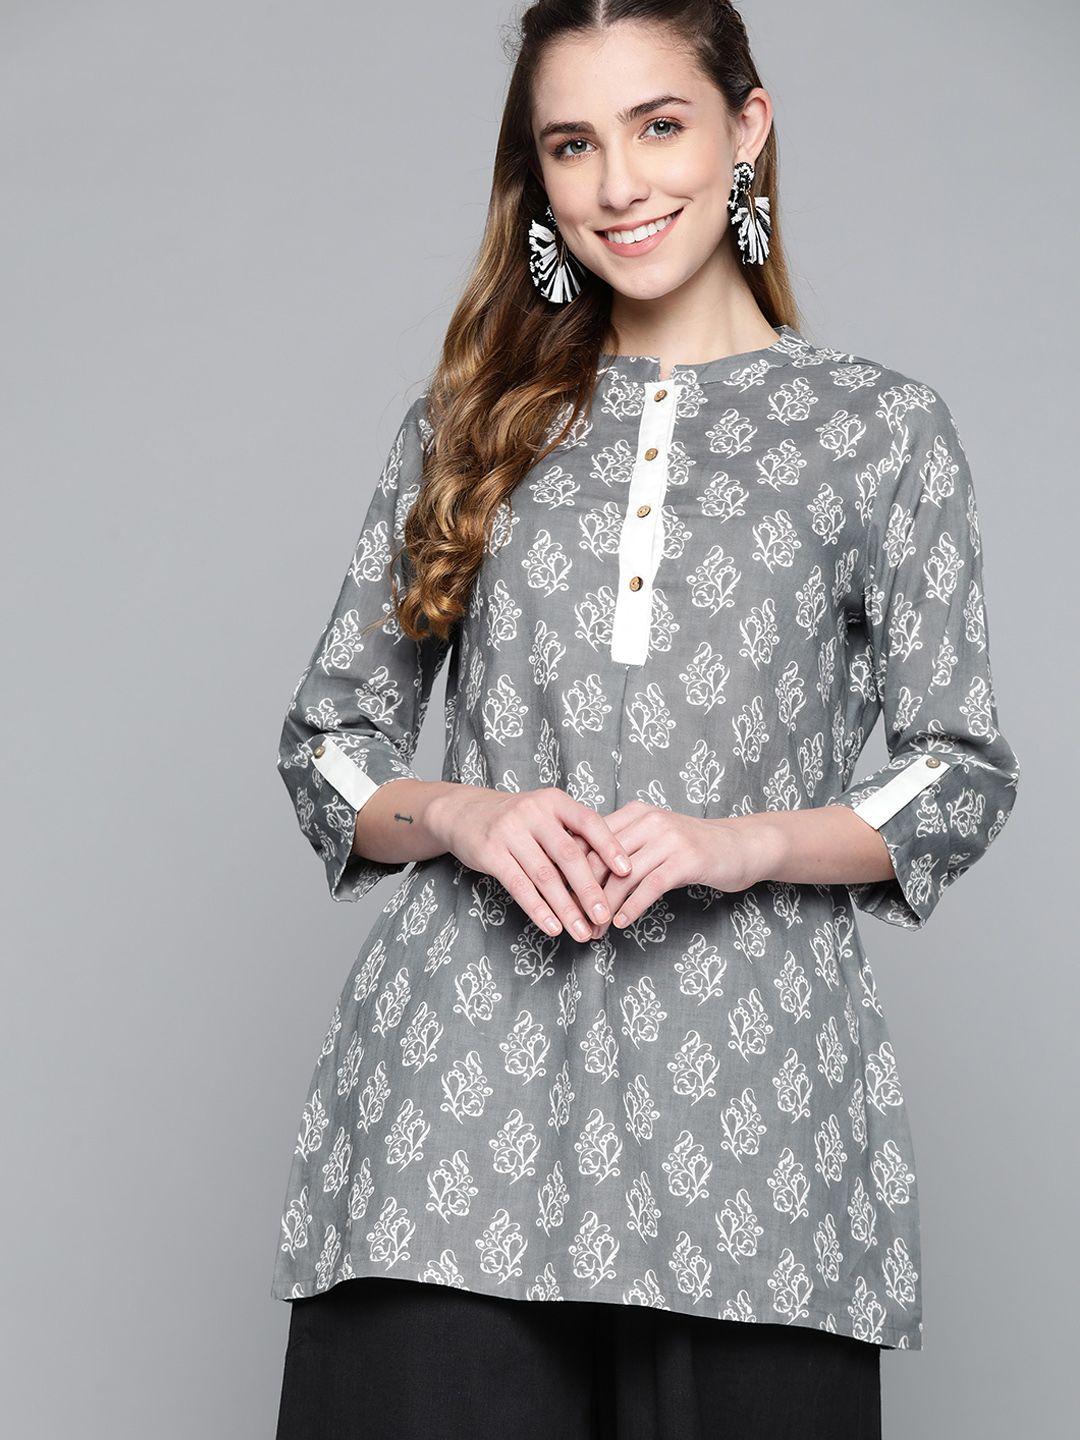 here&now-grey-&-white-floral-print-pure-cotton-kurti